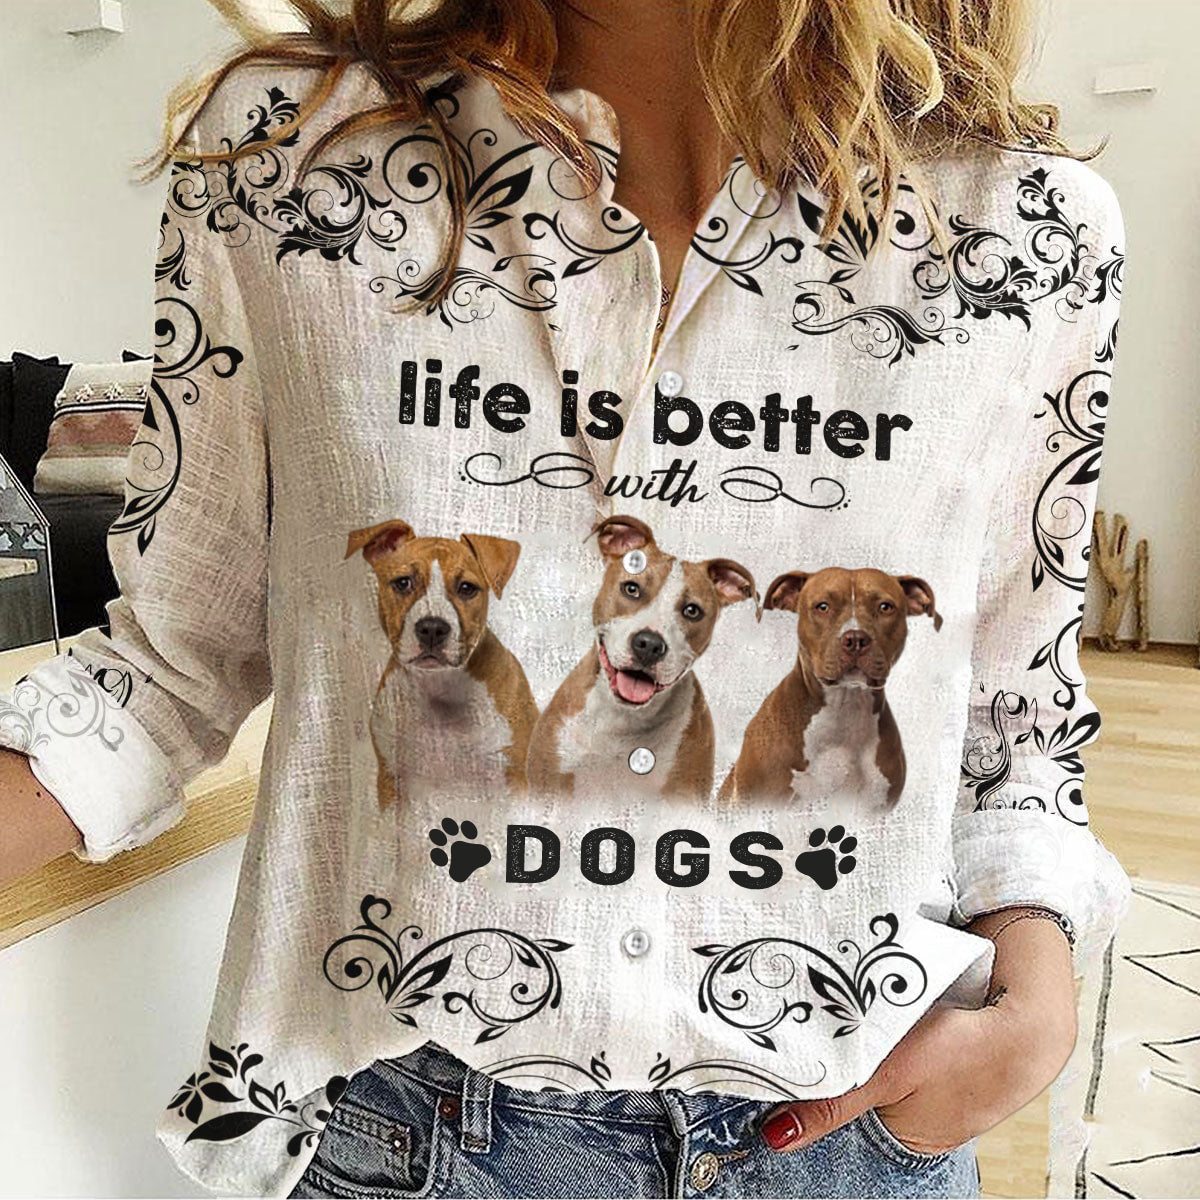 Staffordshire Bull Terrier-Life Is Better With Dogs Women's Long-Sleeve Shirt